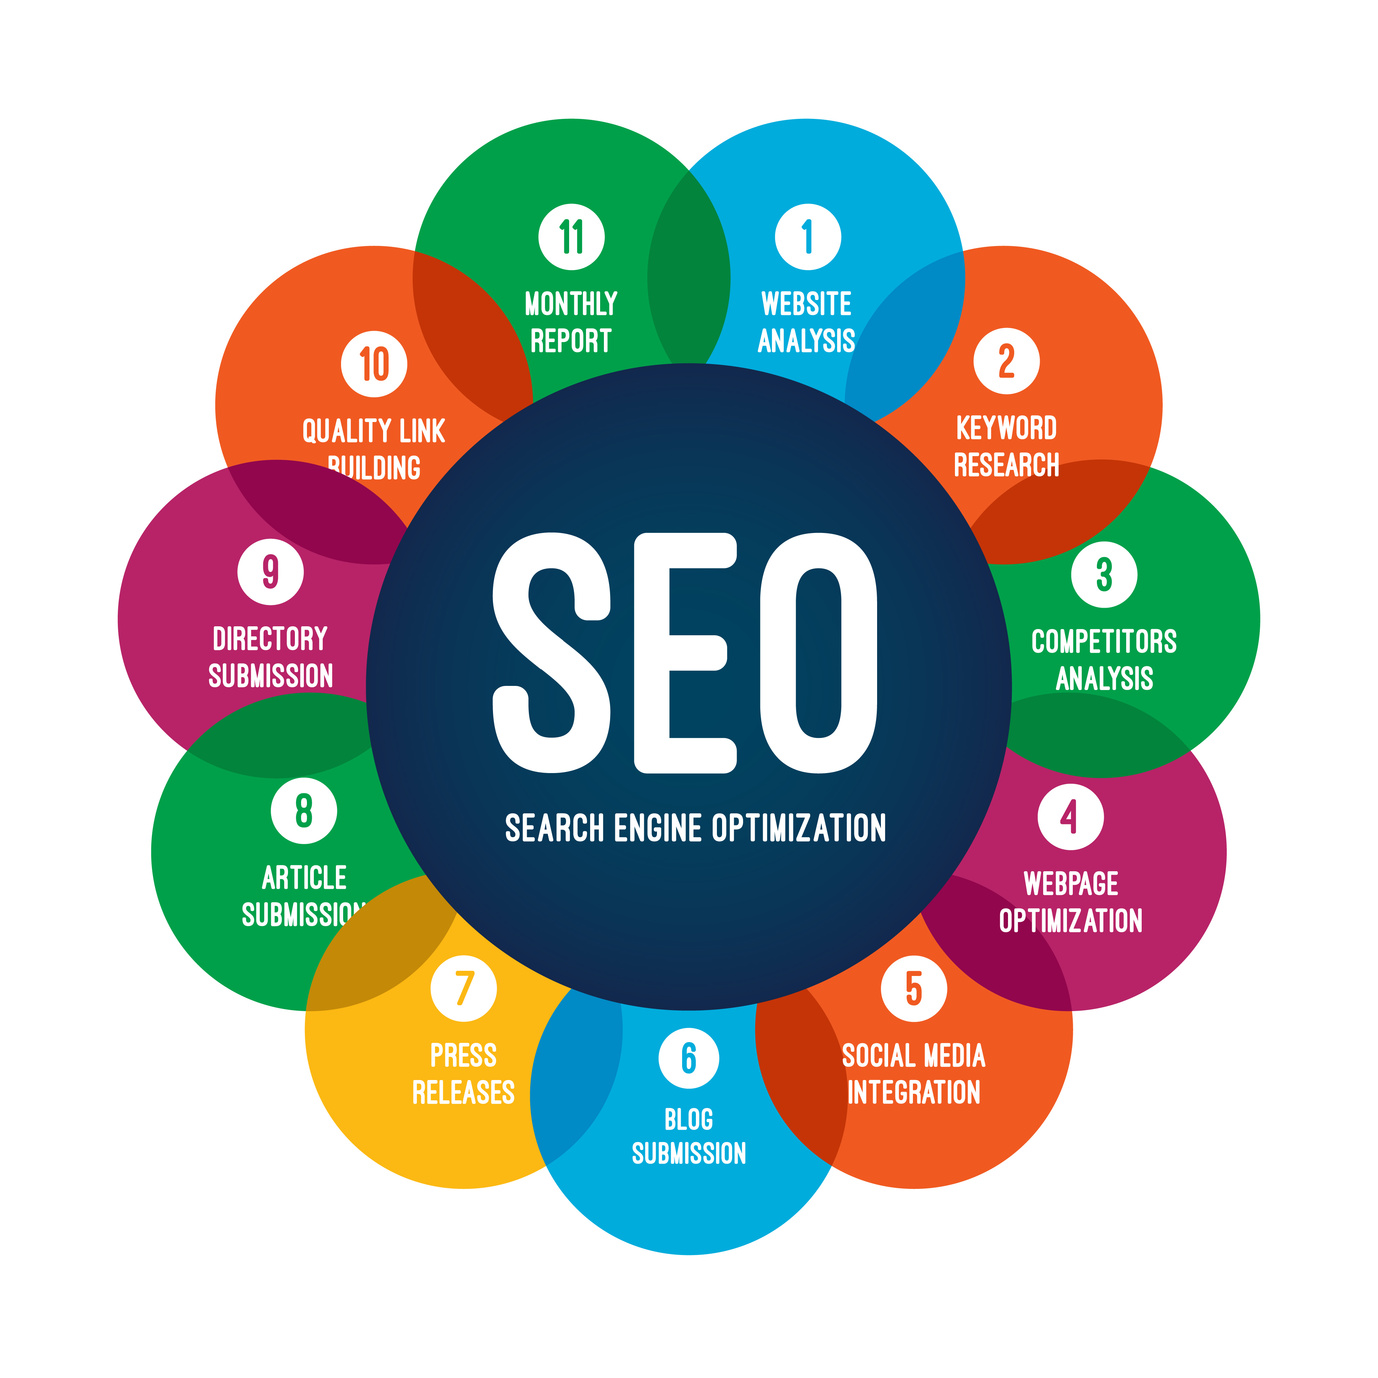 What is SEO? Search Engine Optimization!